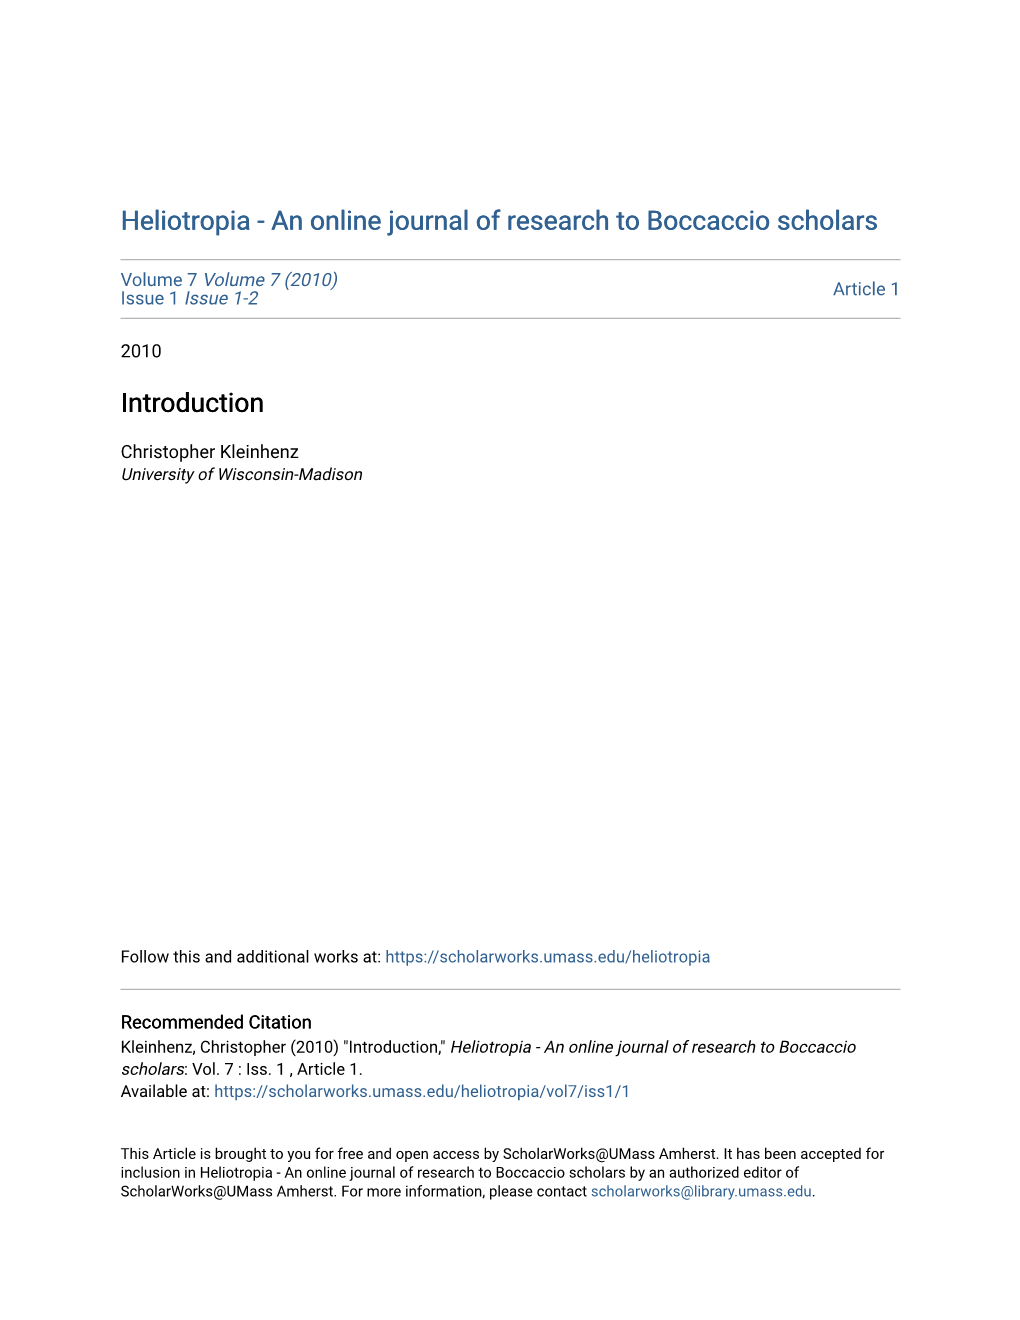 Heliotropia - an Online Journal of Research to Boccaccio Scholars